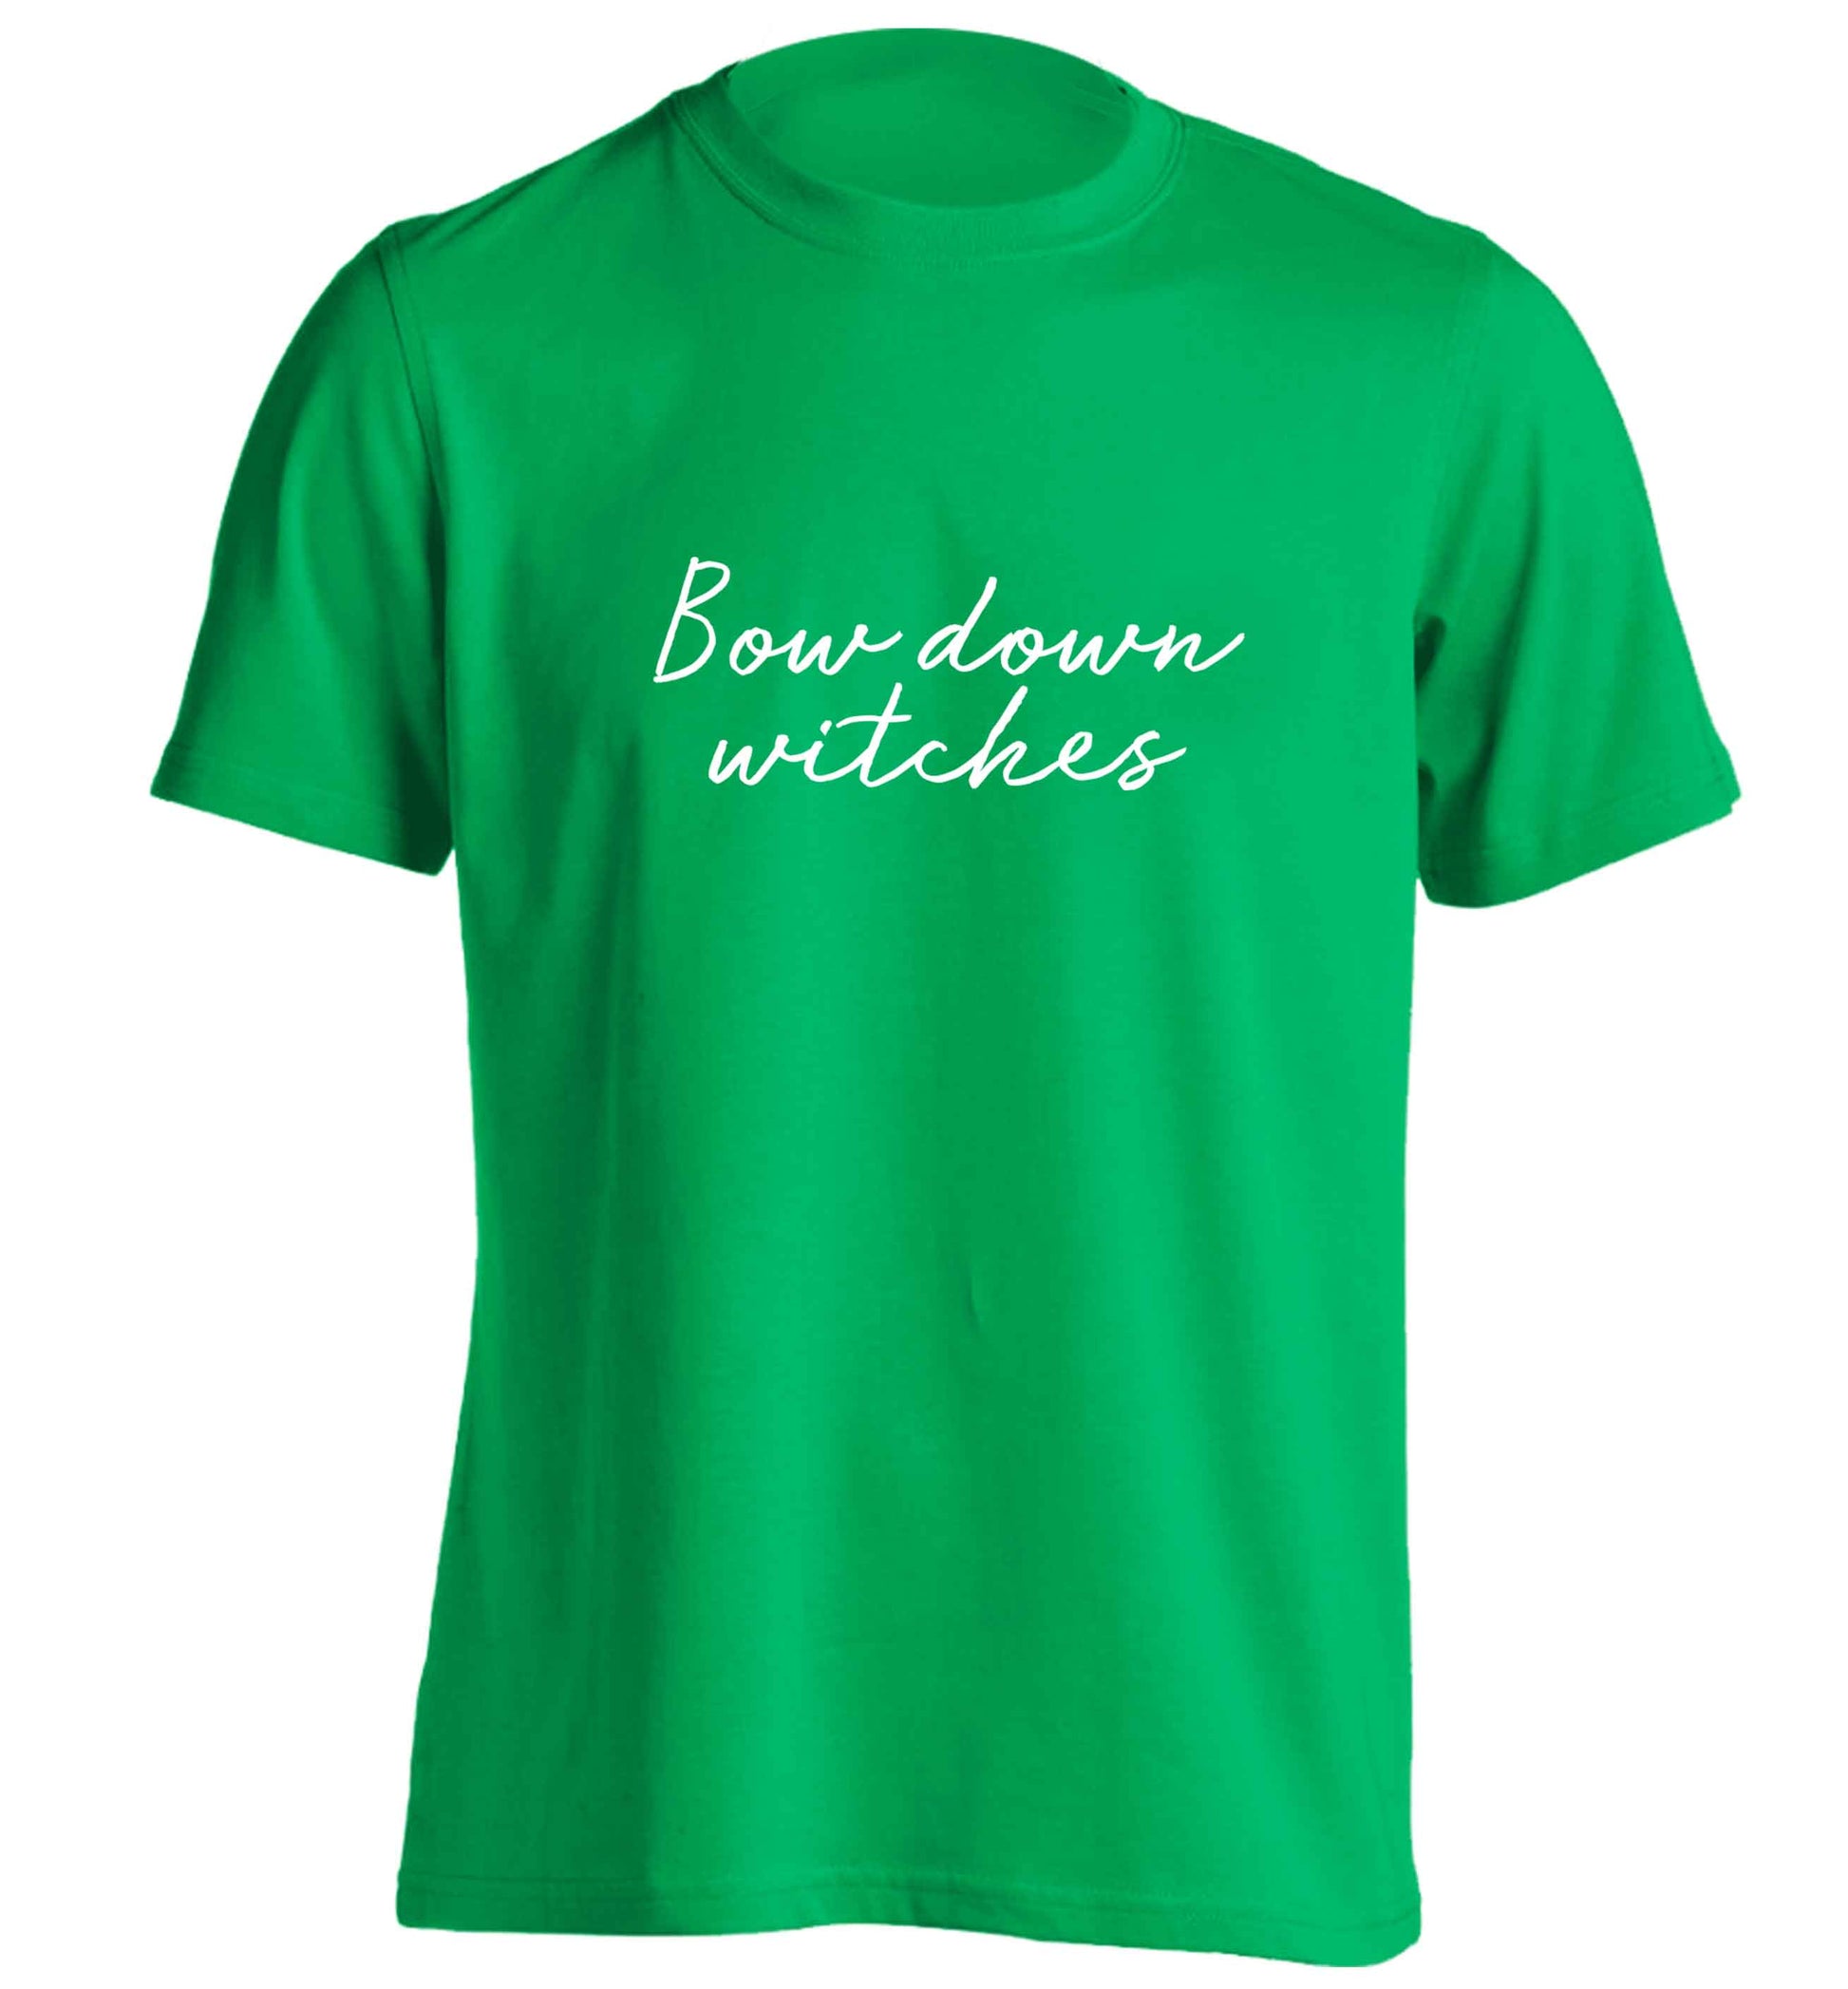 Bow down witches adults unisex green Tshirt 2XL